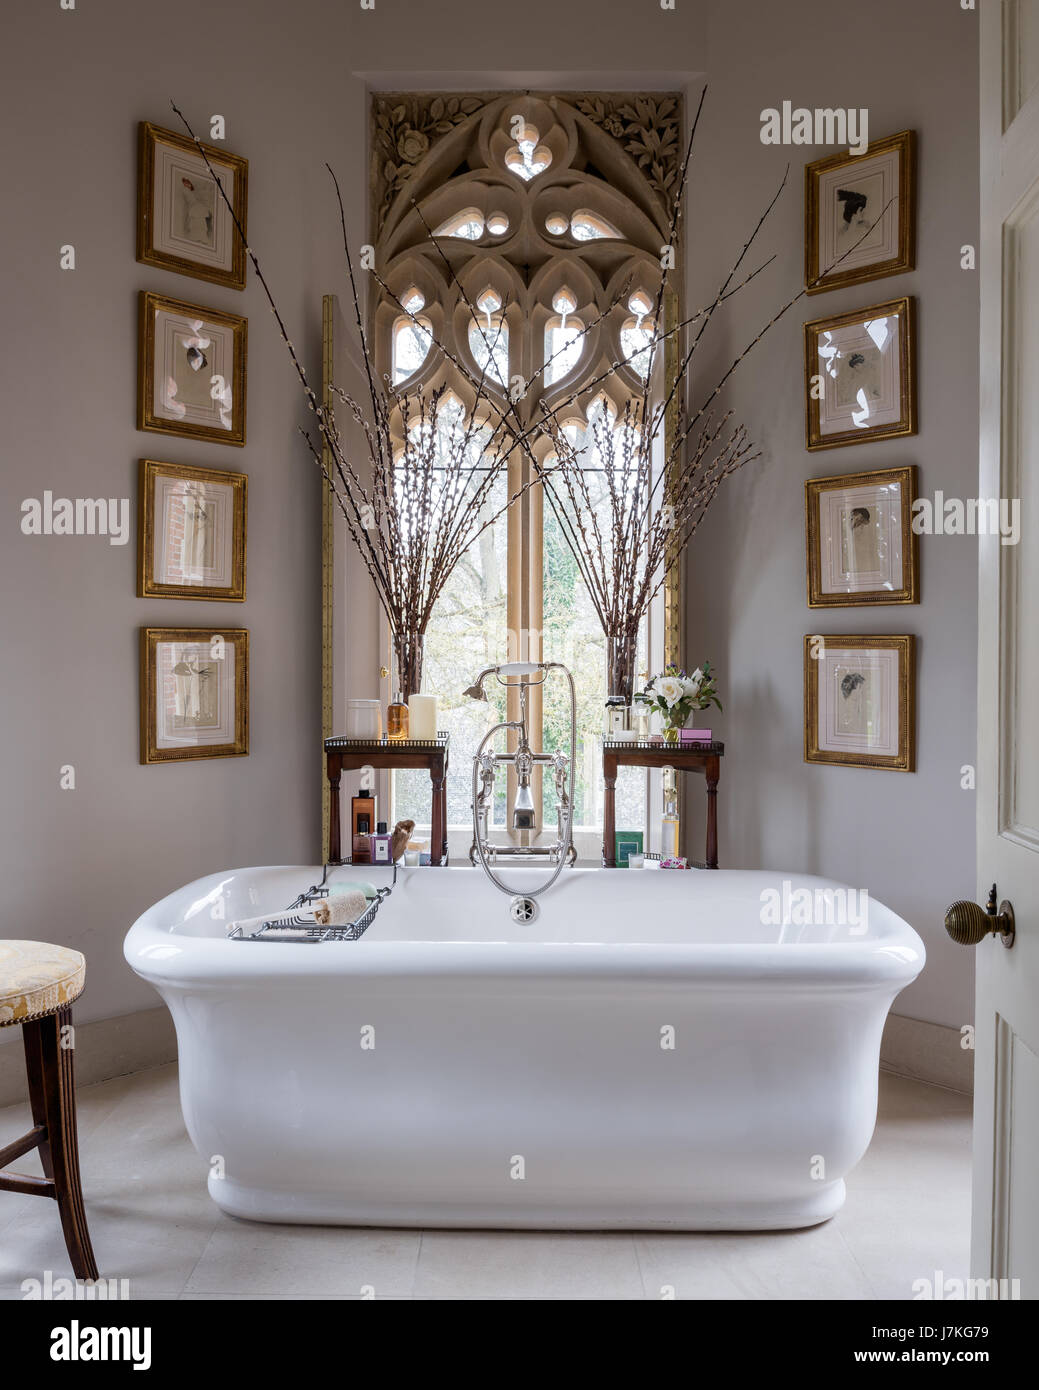 Stand alone bath from Drummonds in bathroom with dramatic gothic window and walls painted in Wax Myrtle by Fired Earth Stock Photo